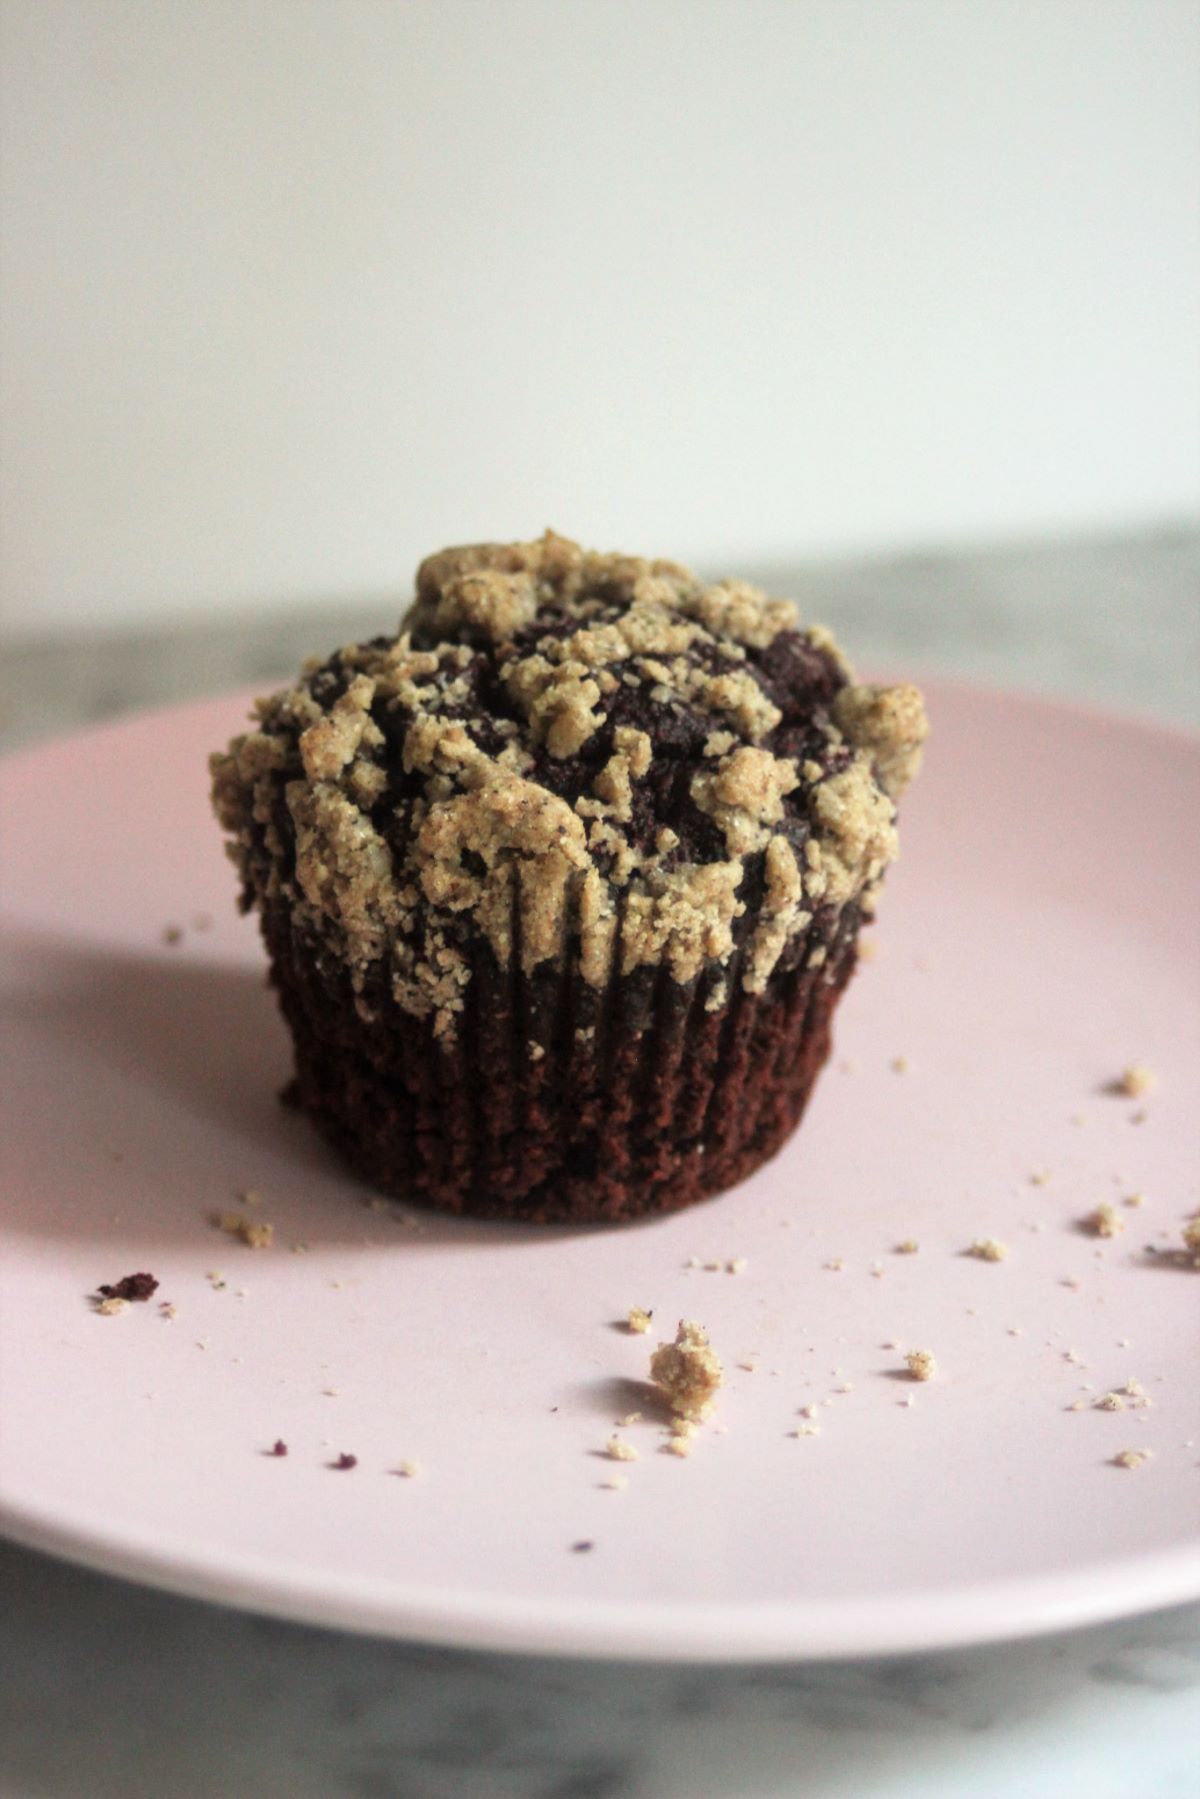 Chocolate beet muffin with brown sugar crumble on a pink plate.